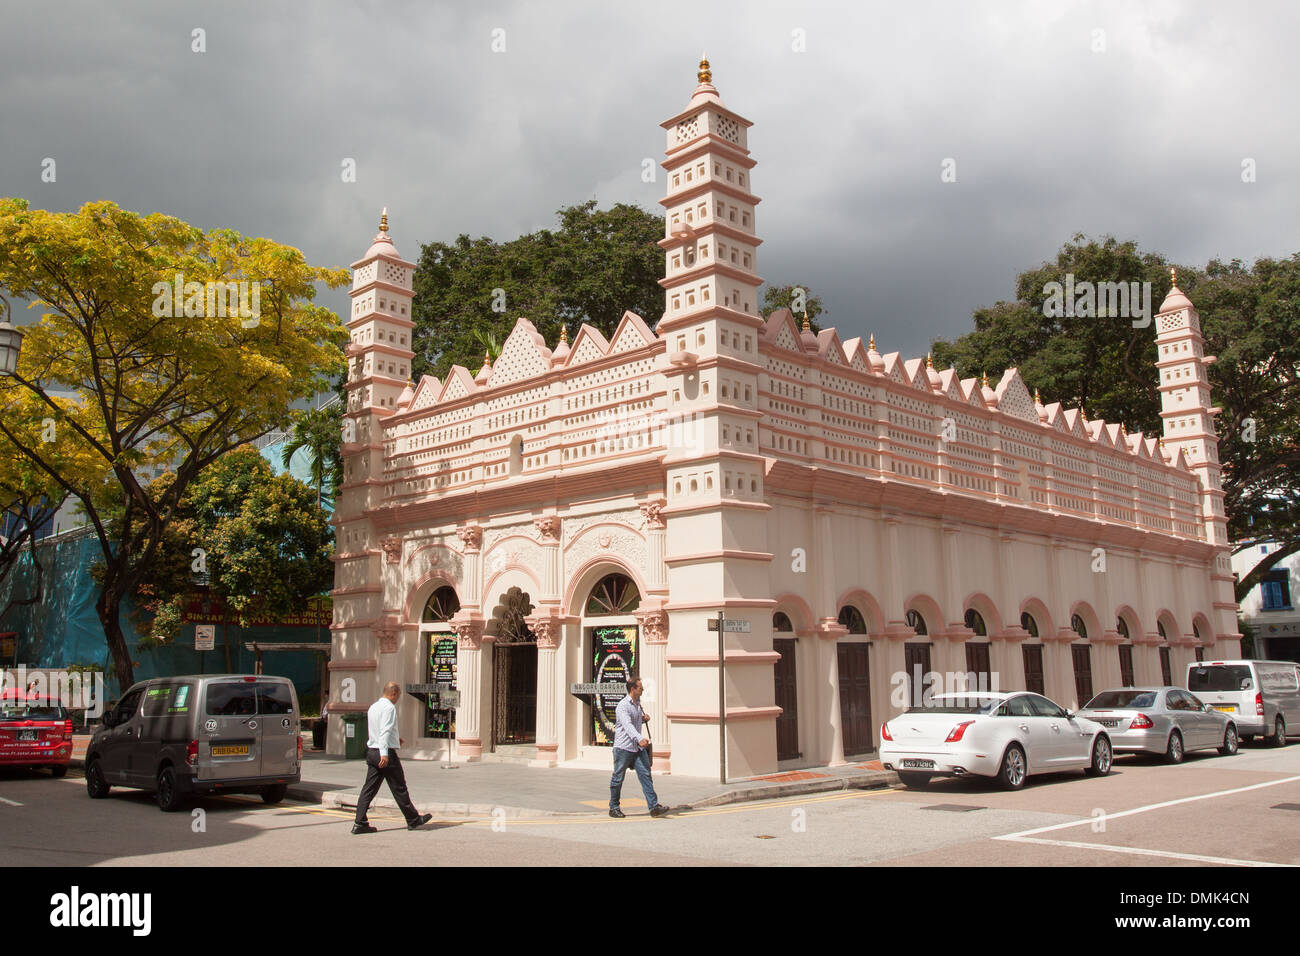 EXTERIOR SHOT OF THE NAGORE DARGAH, MUSLIM SHRINE COMMEMORATING THE LIFE OF THE INDIAN ASCETIC SYED SHAHUL HAMID, CHINATOWN, SINGAPORE Stock Photo